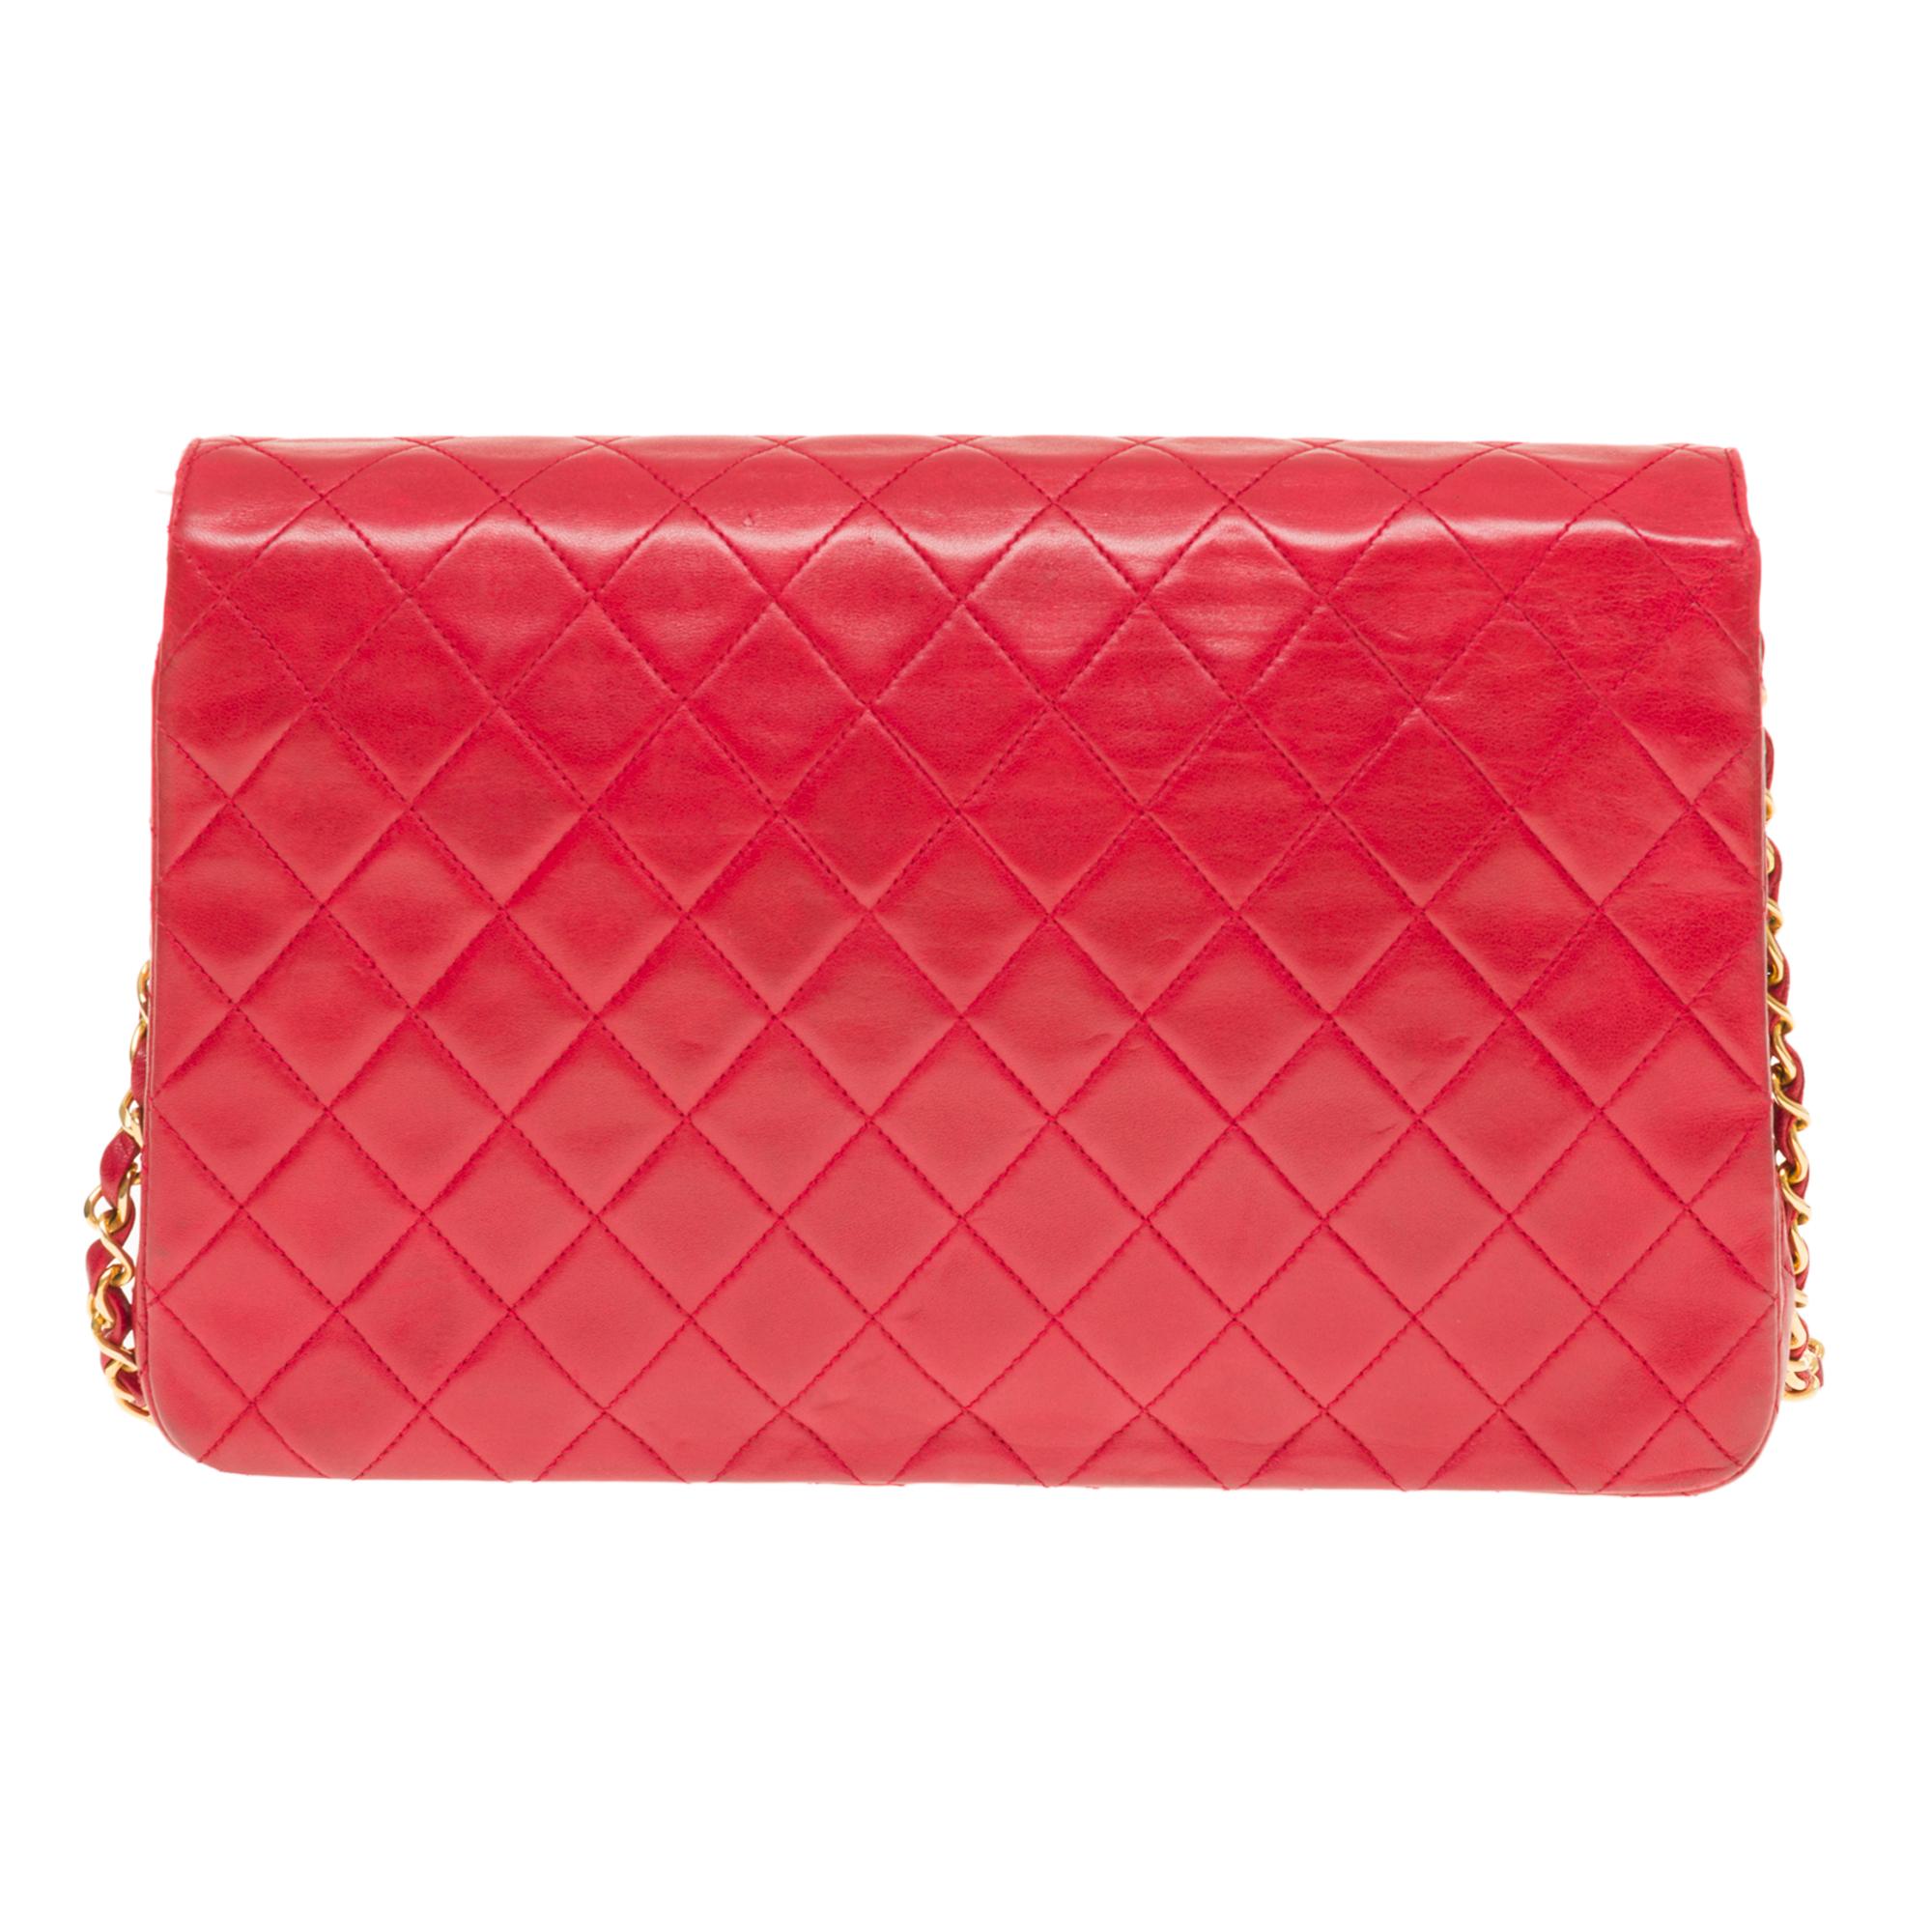 Splendid Chanel Classique shoulder bag with red quilted leather flap, gold-tone metal hardware, a gold-tone metal chain handle intertwined with red leather for shoulder support .
CC logo closure in gold metal on flap.
Red leather lining, one central